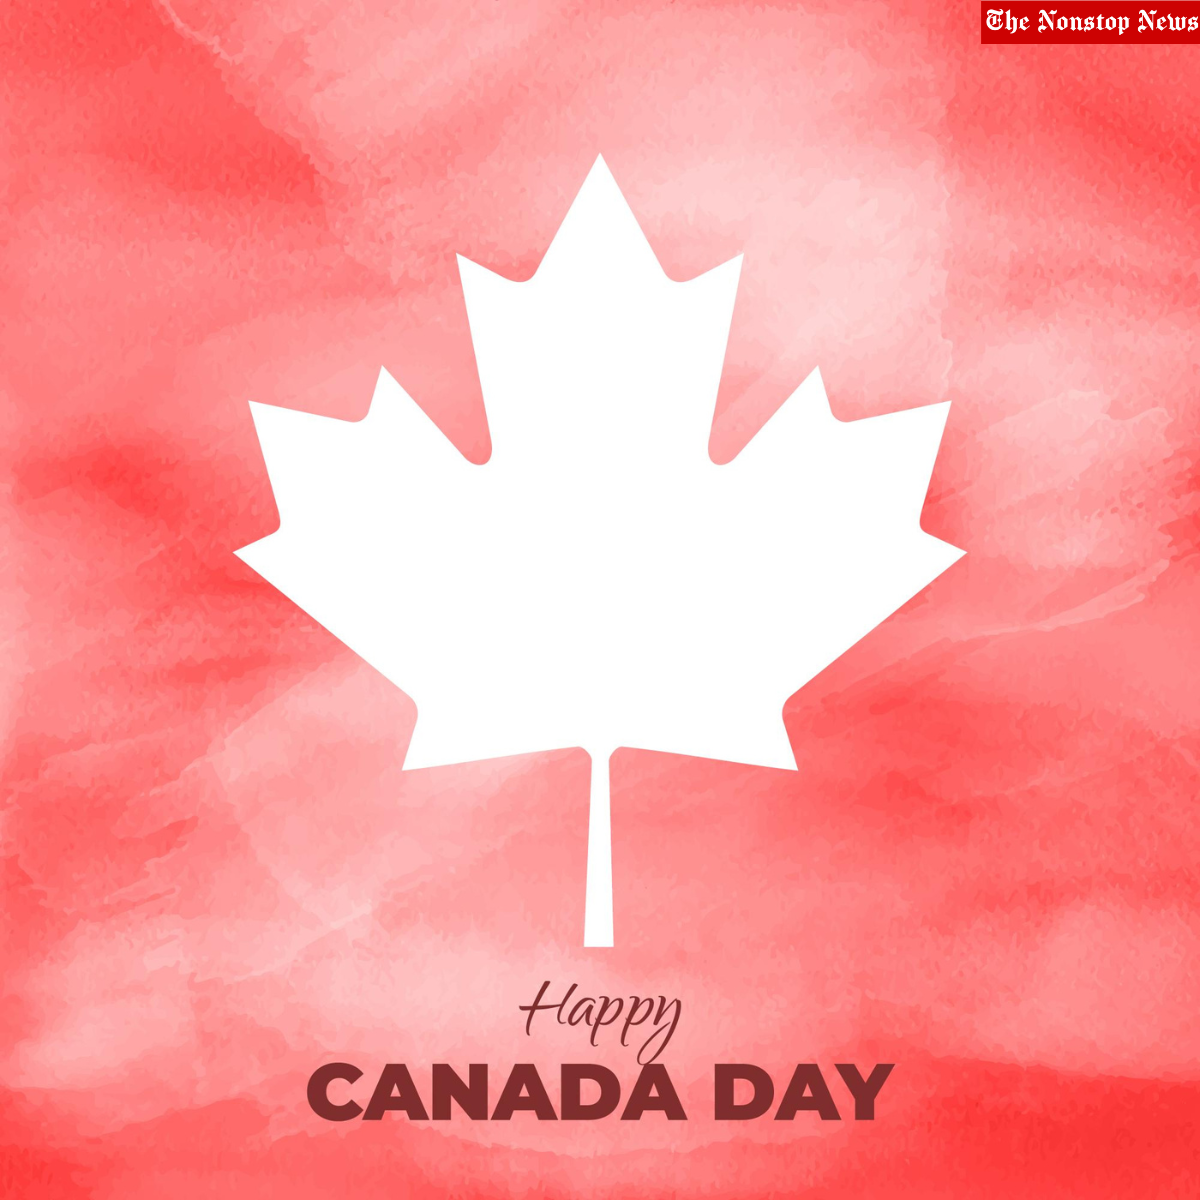 Happy Canada Day 2022: Best Instagram Captions, Facebook Messages, Twitter Greetings, WhatsApp Status, Reddit Quotes, and Memes to Share